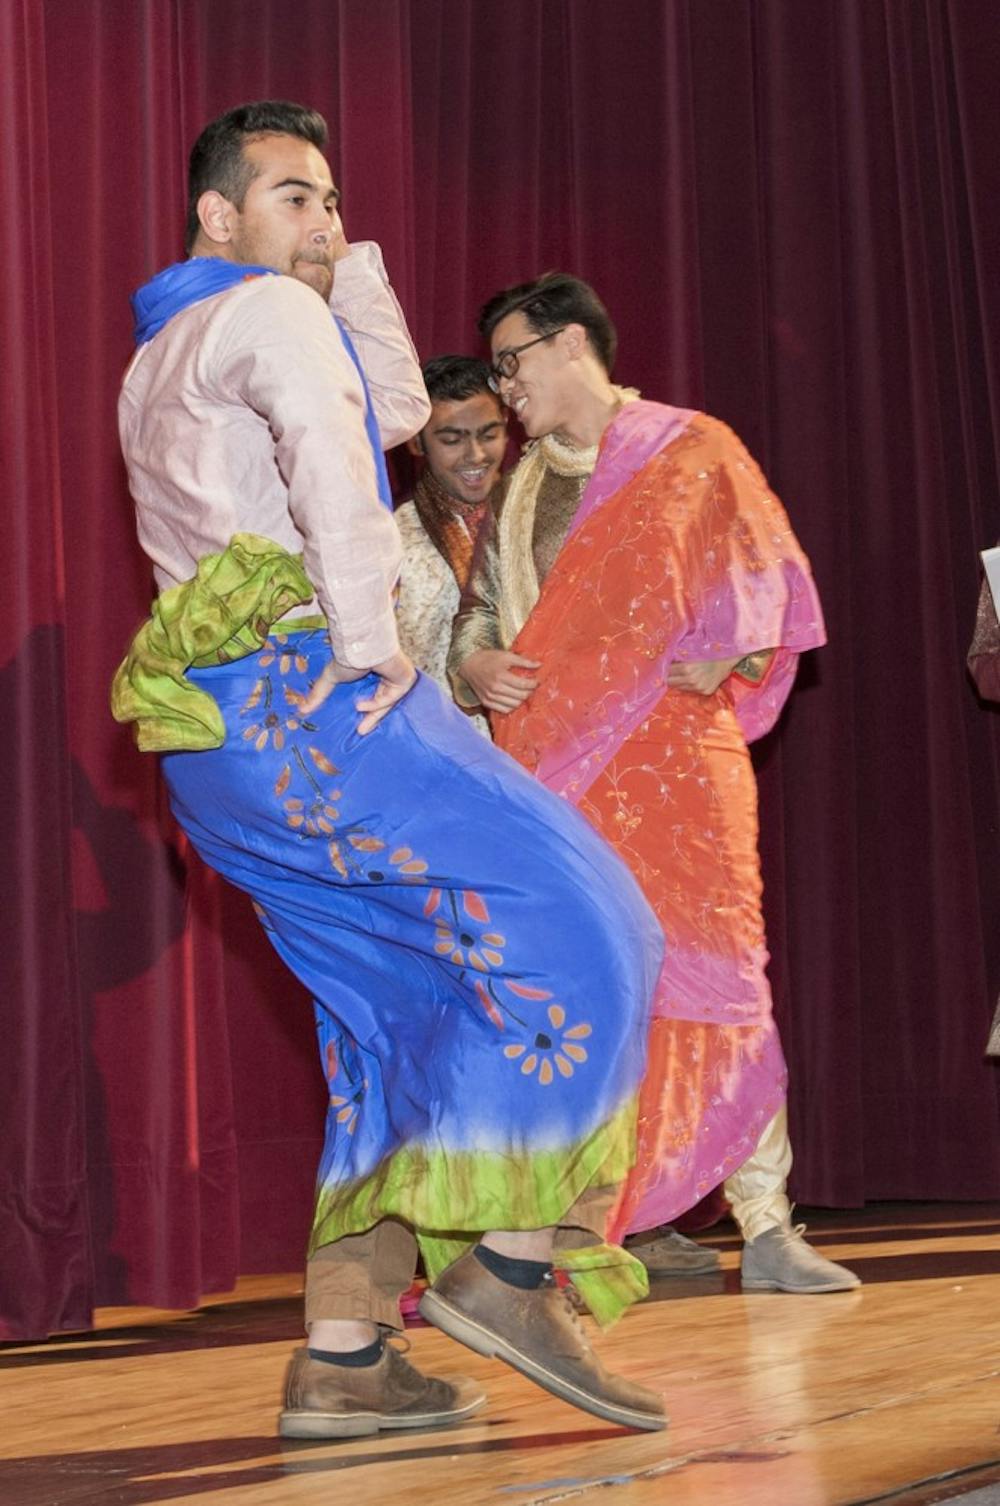 Junior Daniyal Munir, draped in a sari, models the traditional garment to cheers and applause from the audience in the Indiana Memorial Union on Friday.